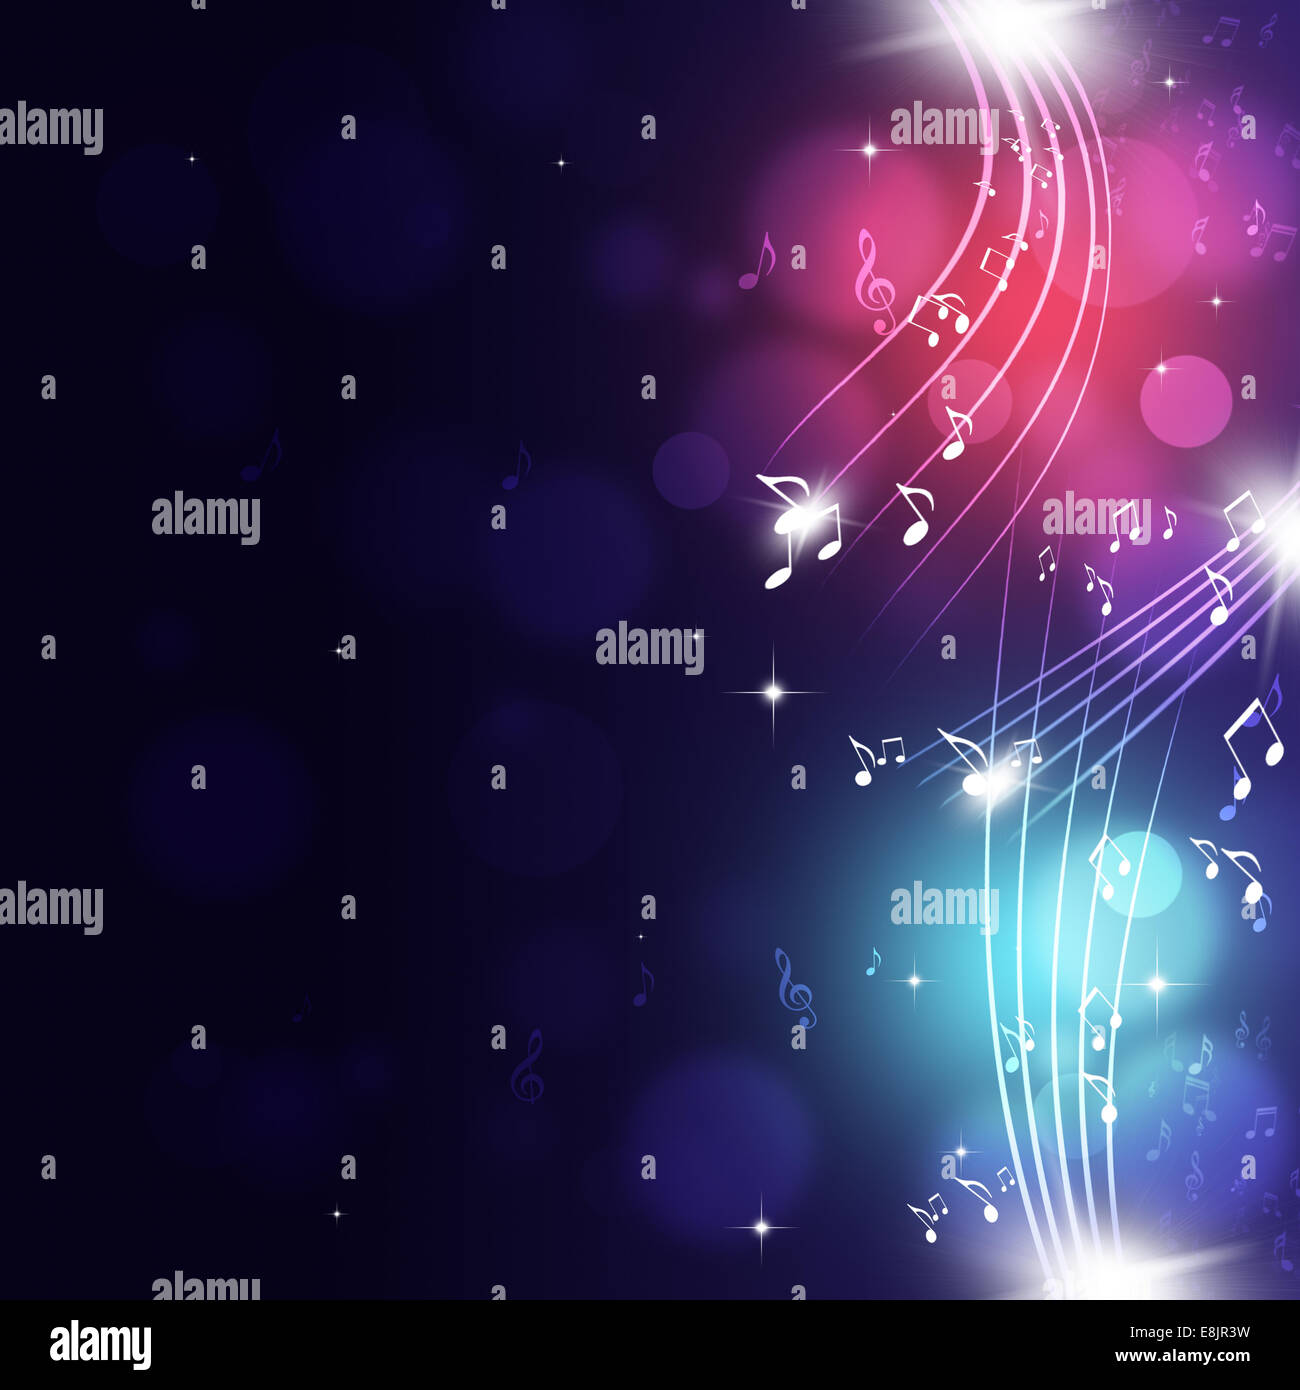 abstract music notes multicolor background for party events Stock Photo